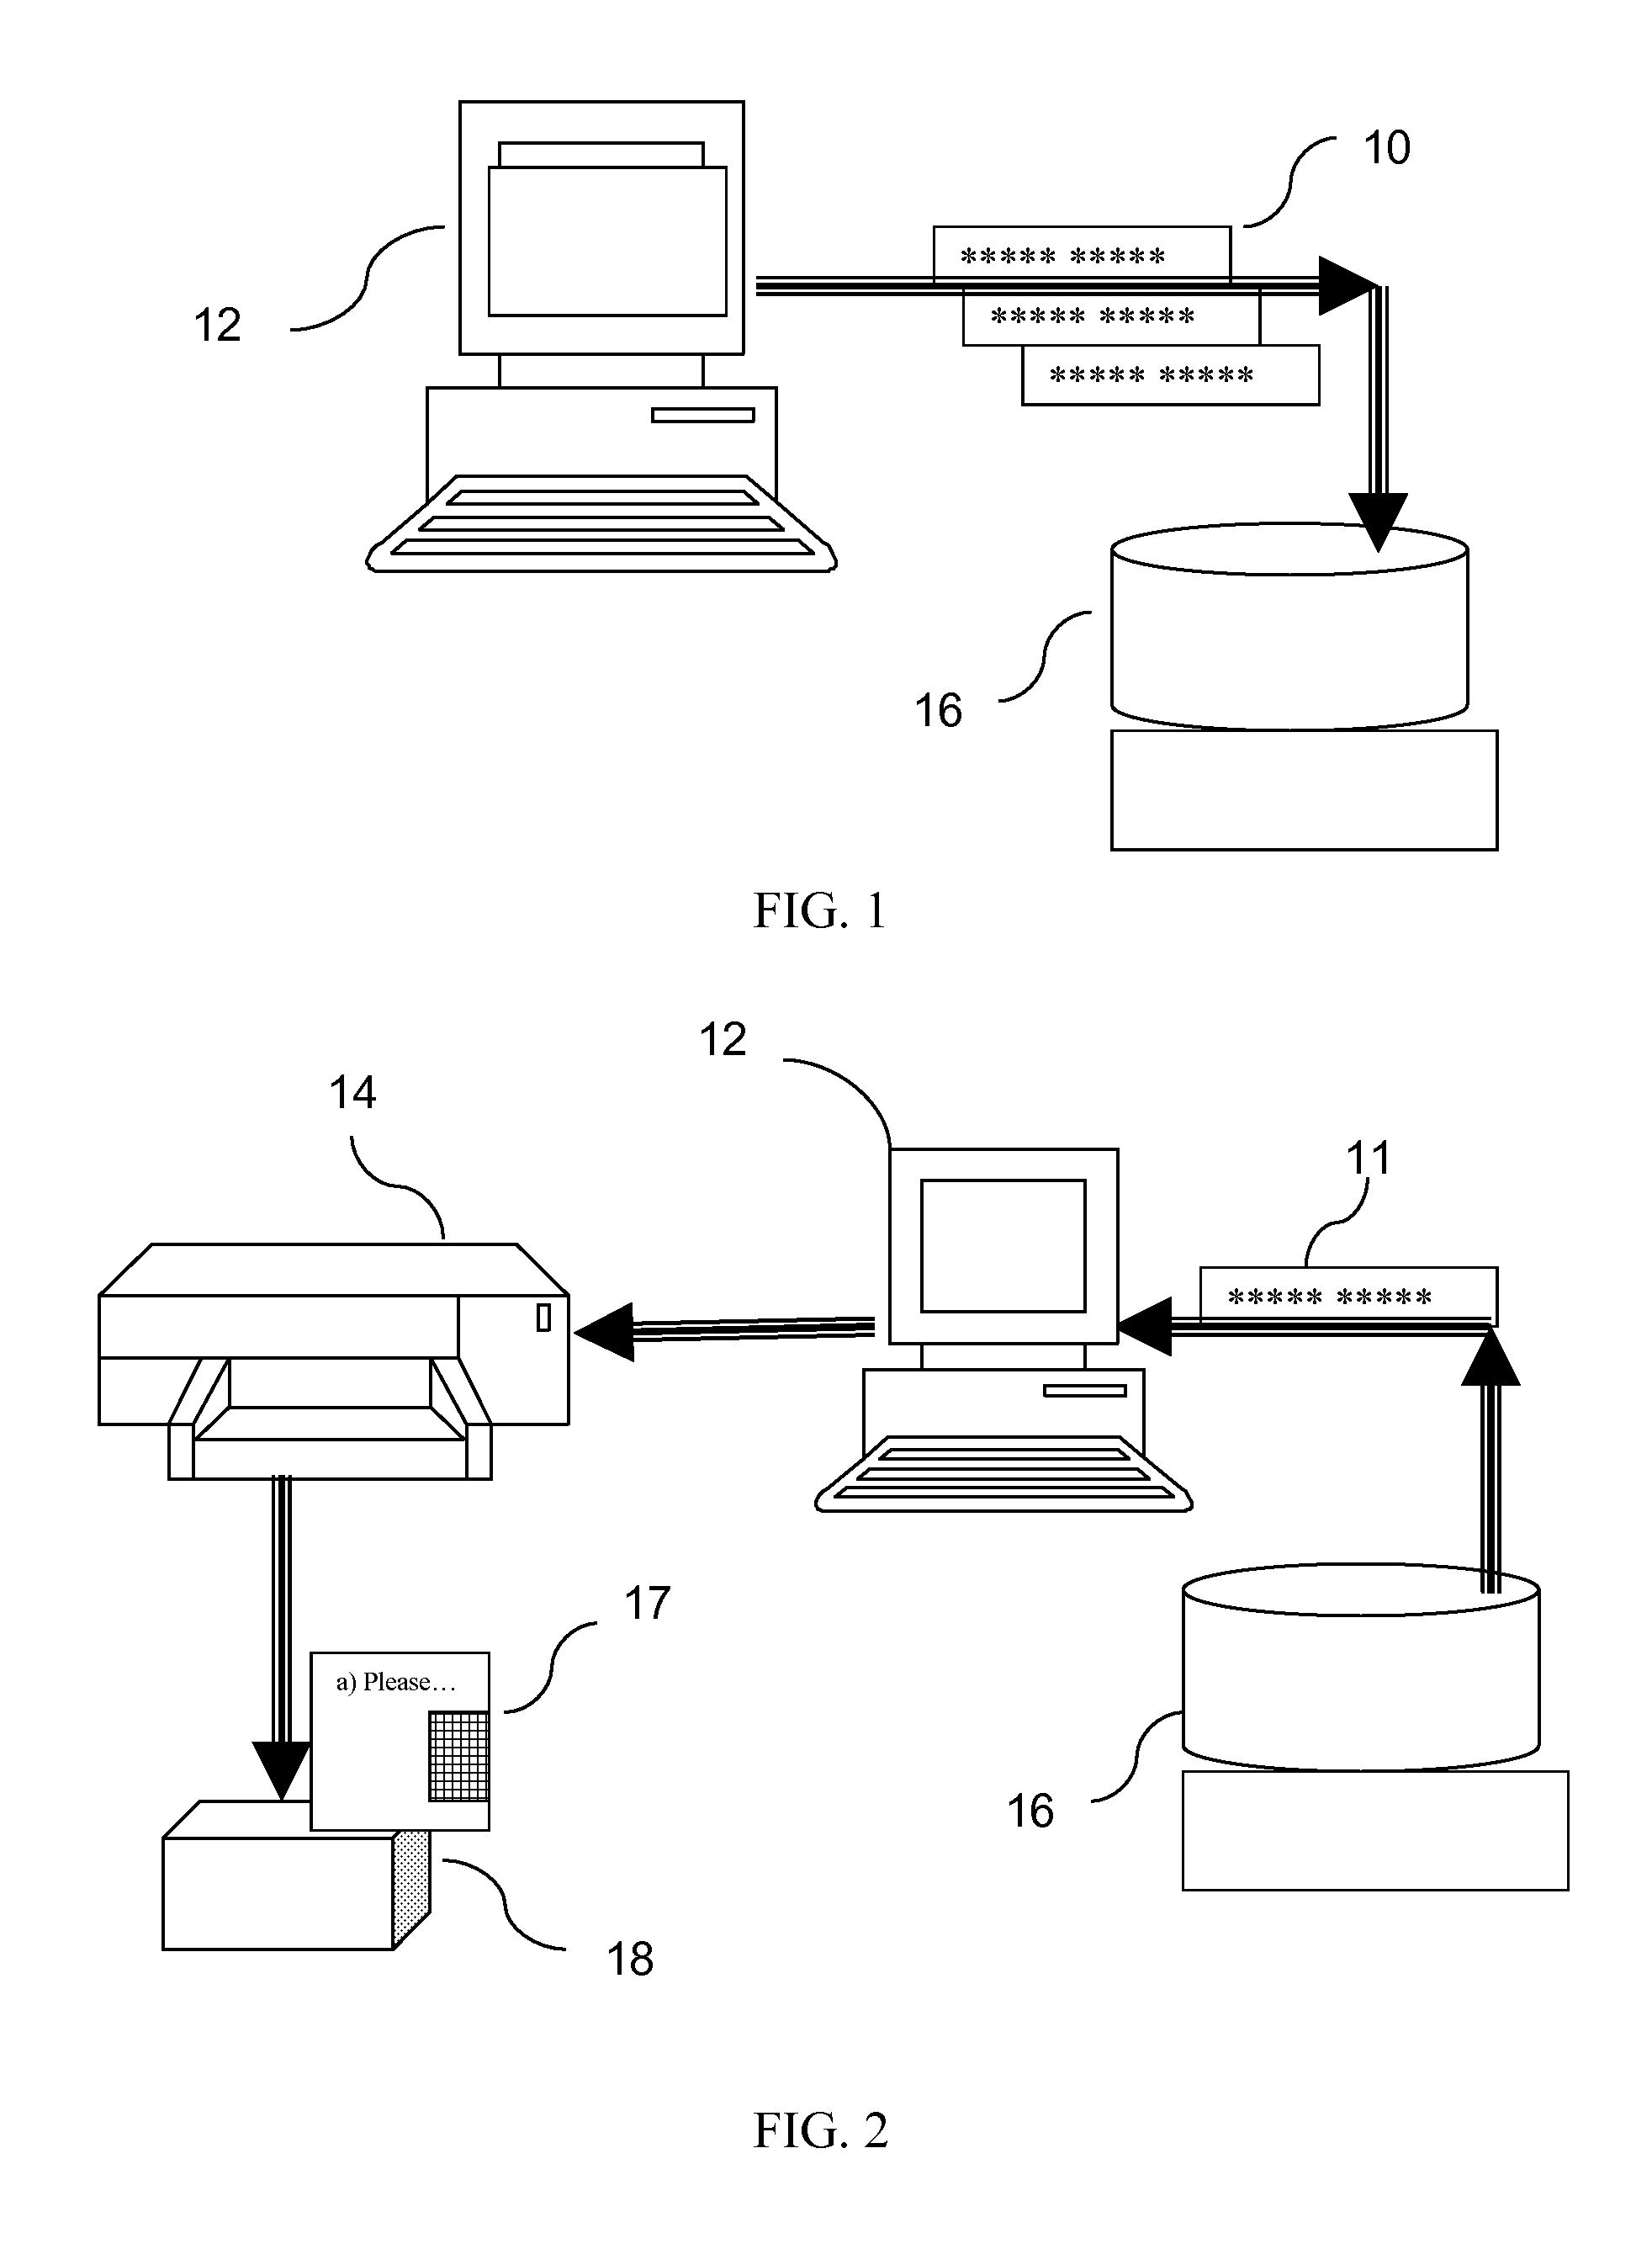 System for product authentication powered by phone transmission